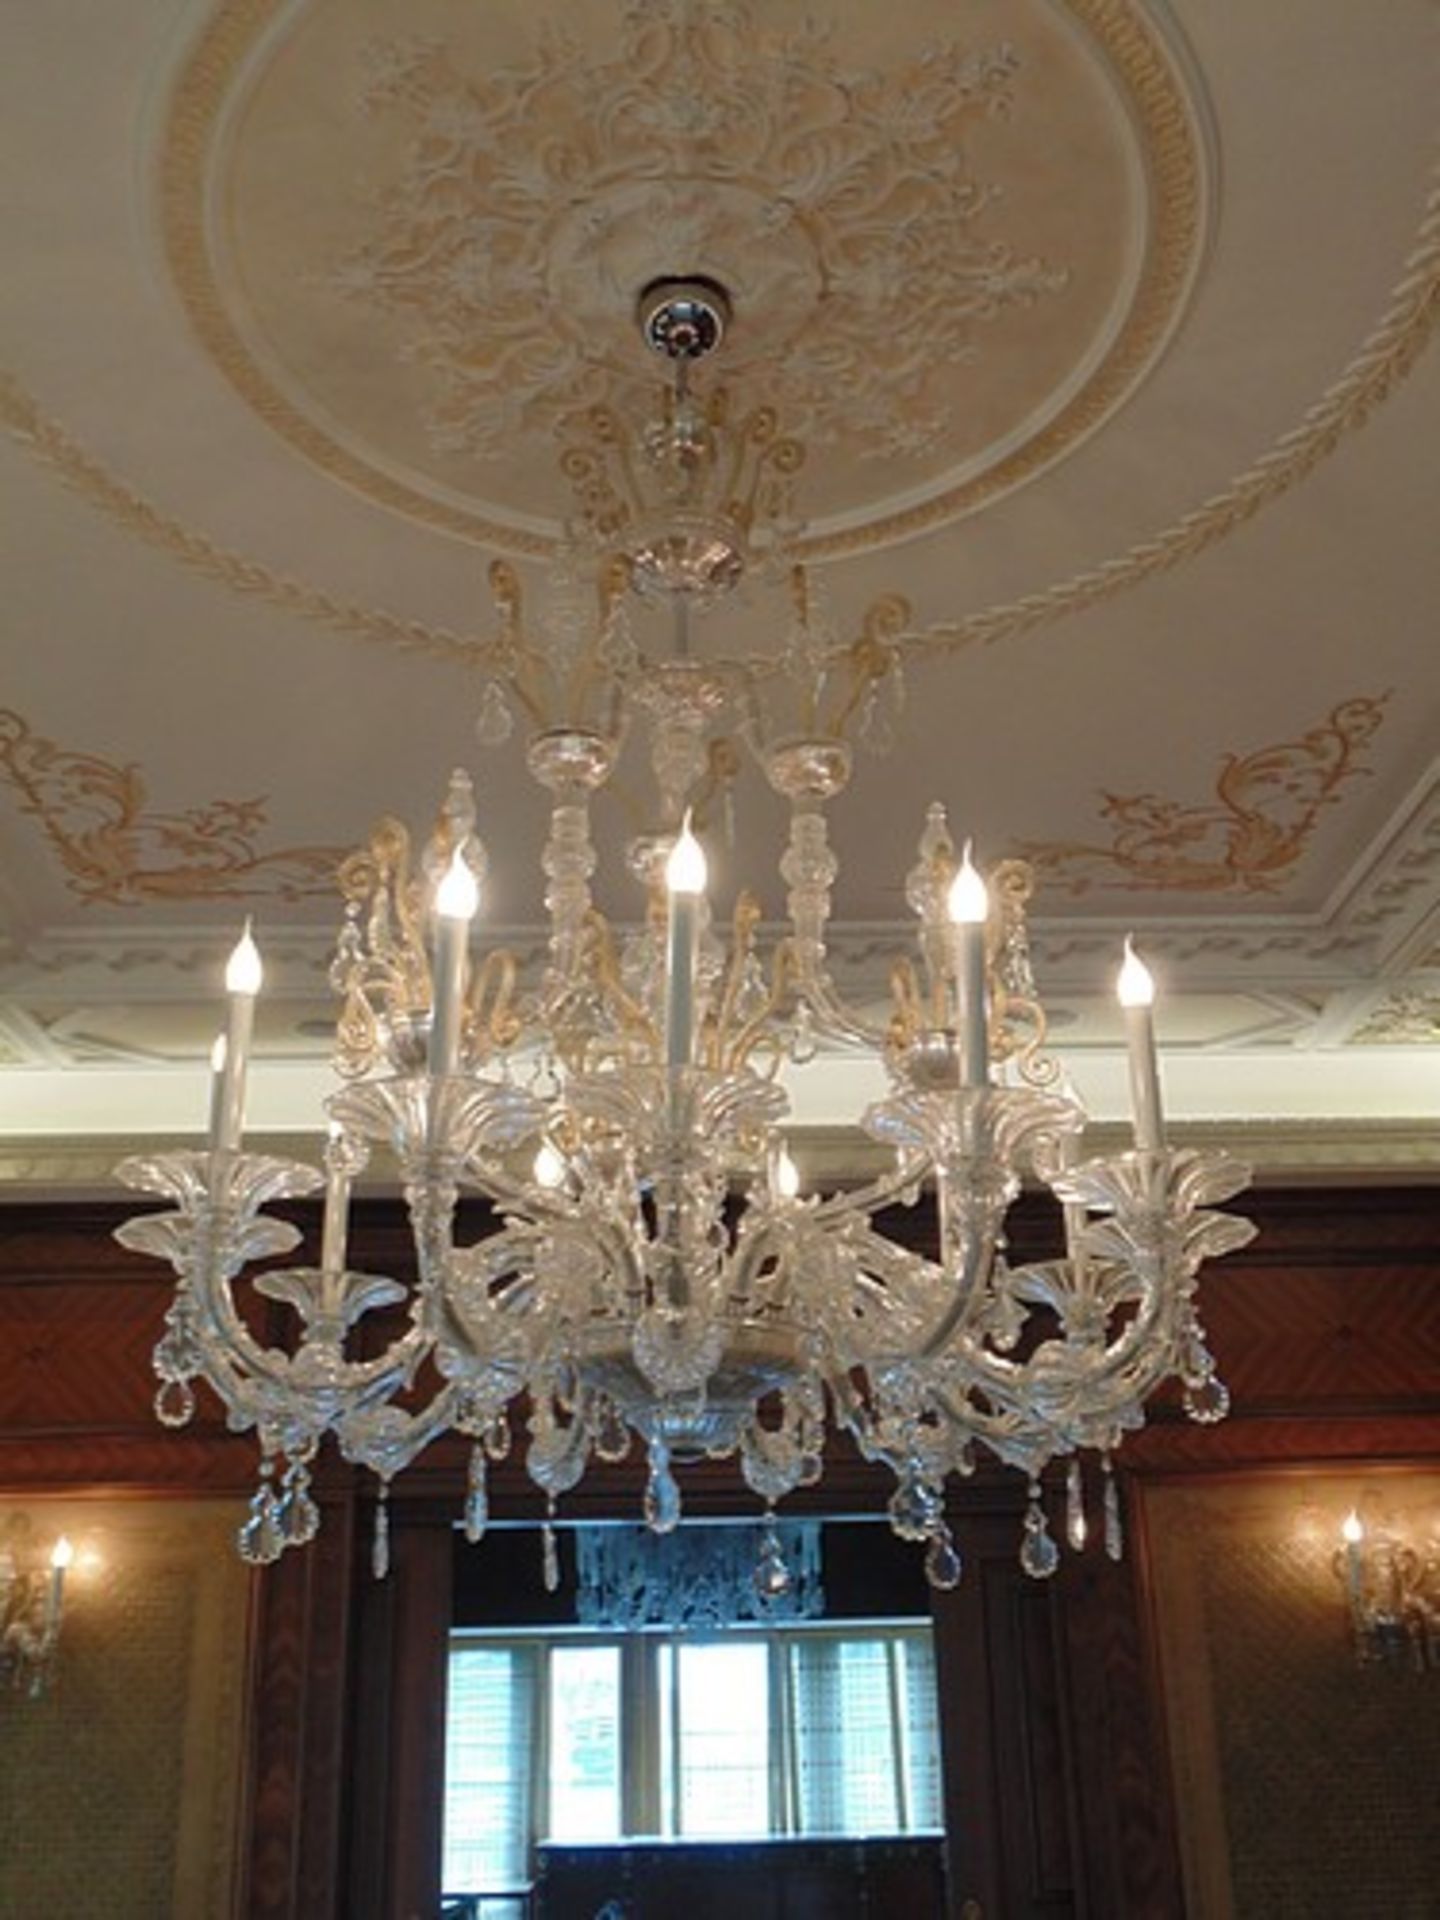 Taif Murano chandelier by Barovier & Toso 12 arm crystal chandelier, with gilded and chromed metal - Image 8 of 8